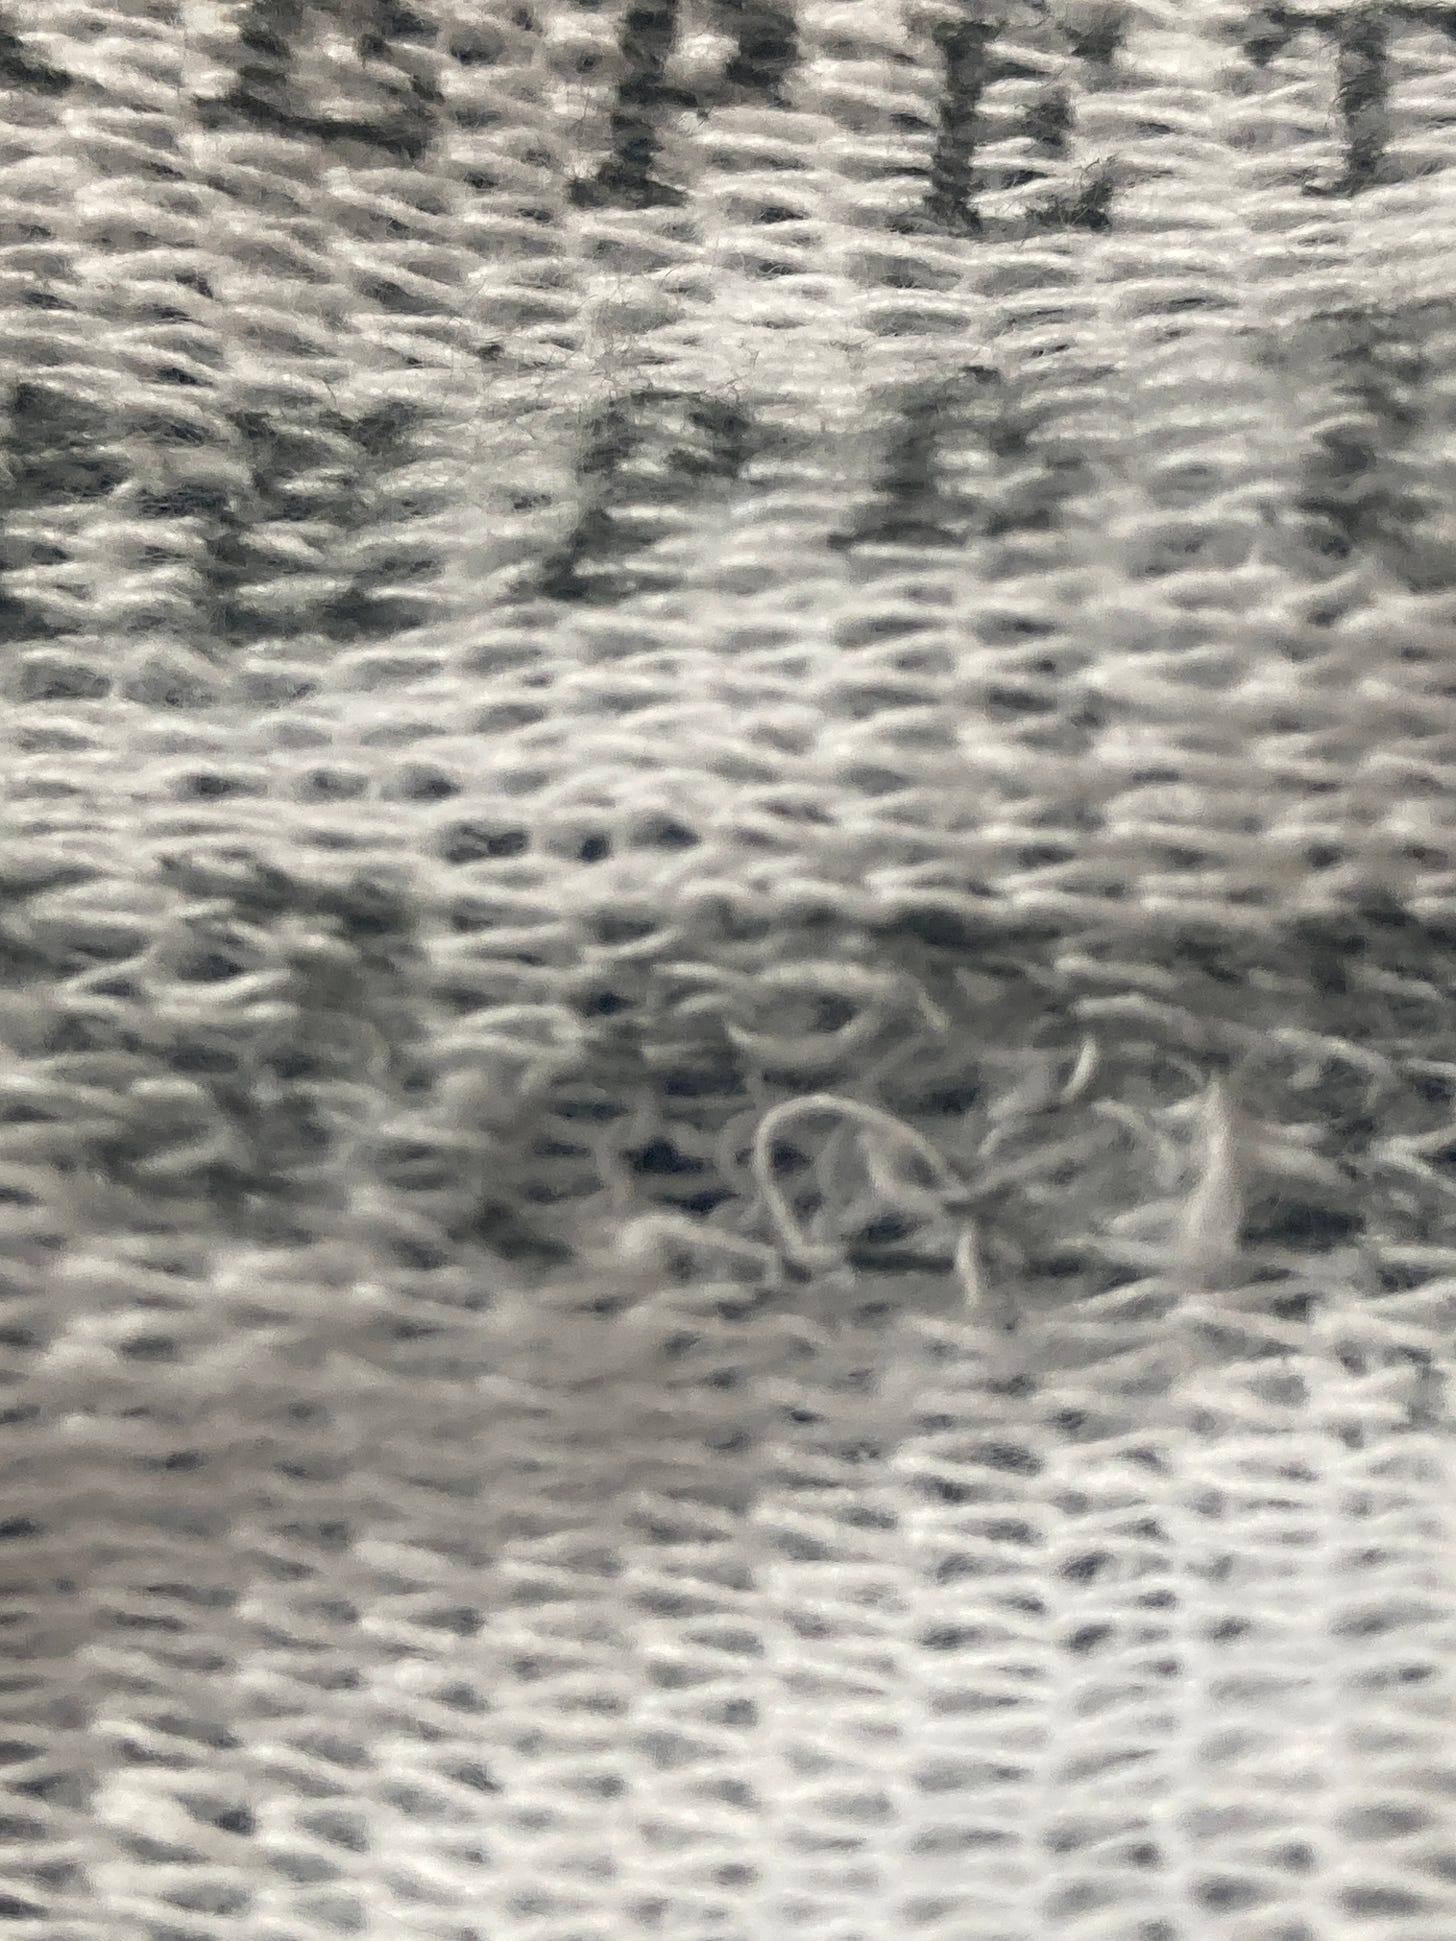 Detail of text printed on dishcloth with a frayed patch of wear and tear beneath the word ‘repetitive’